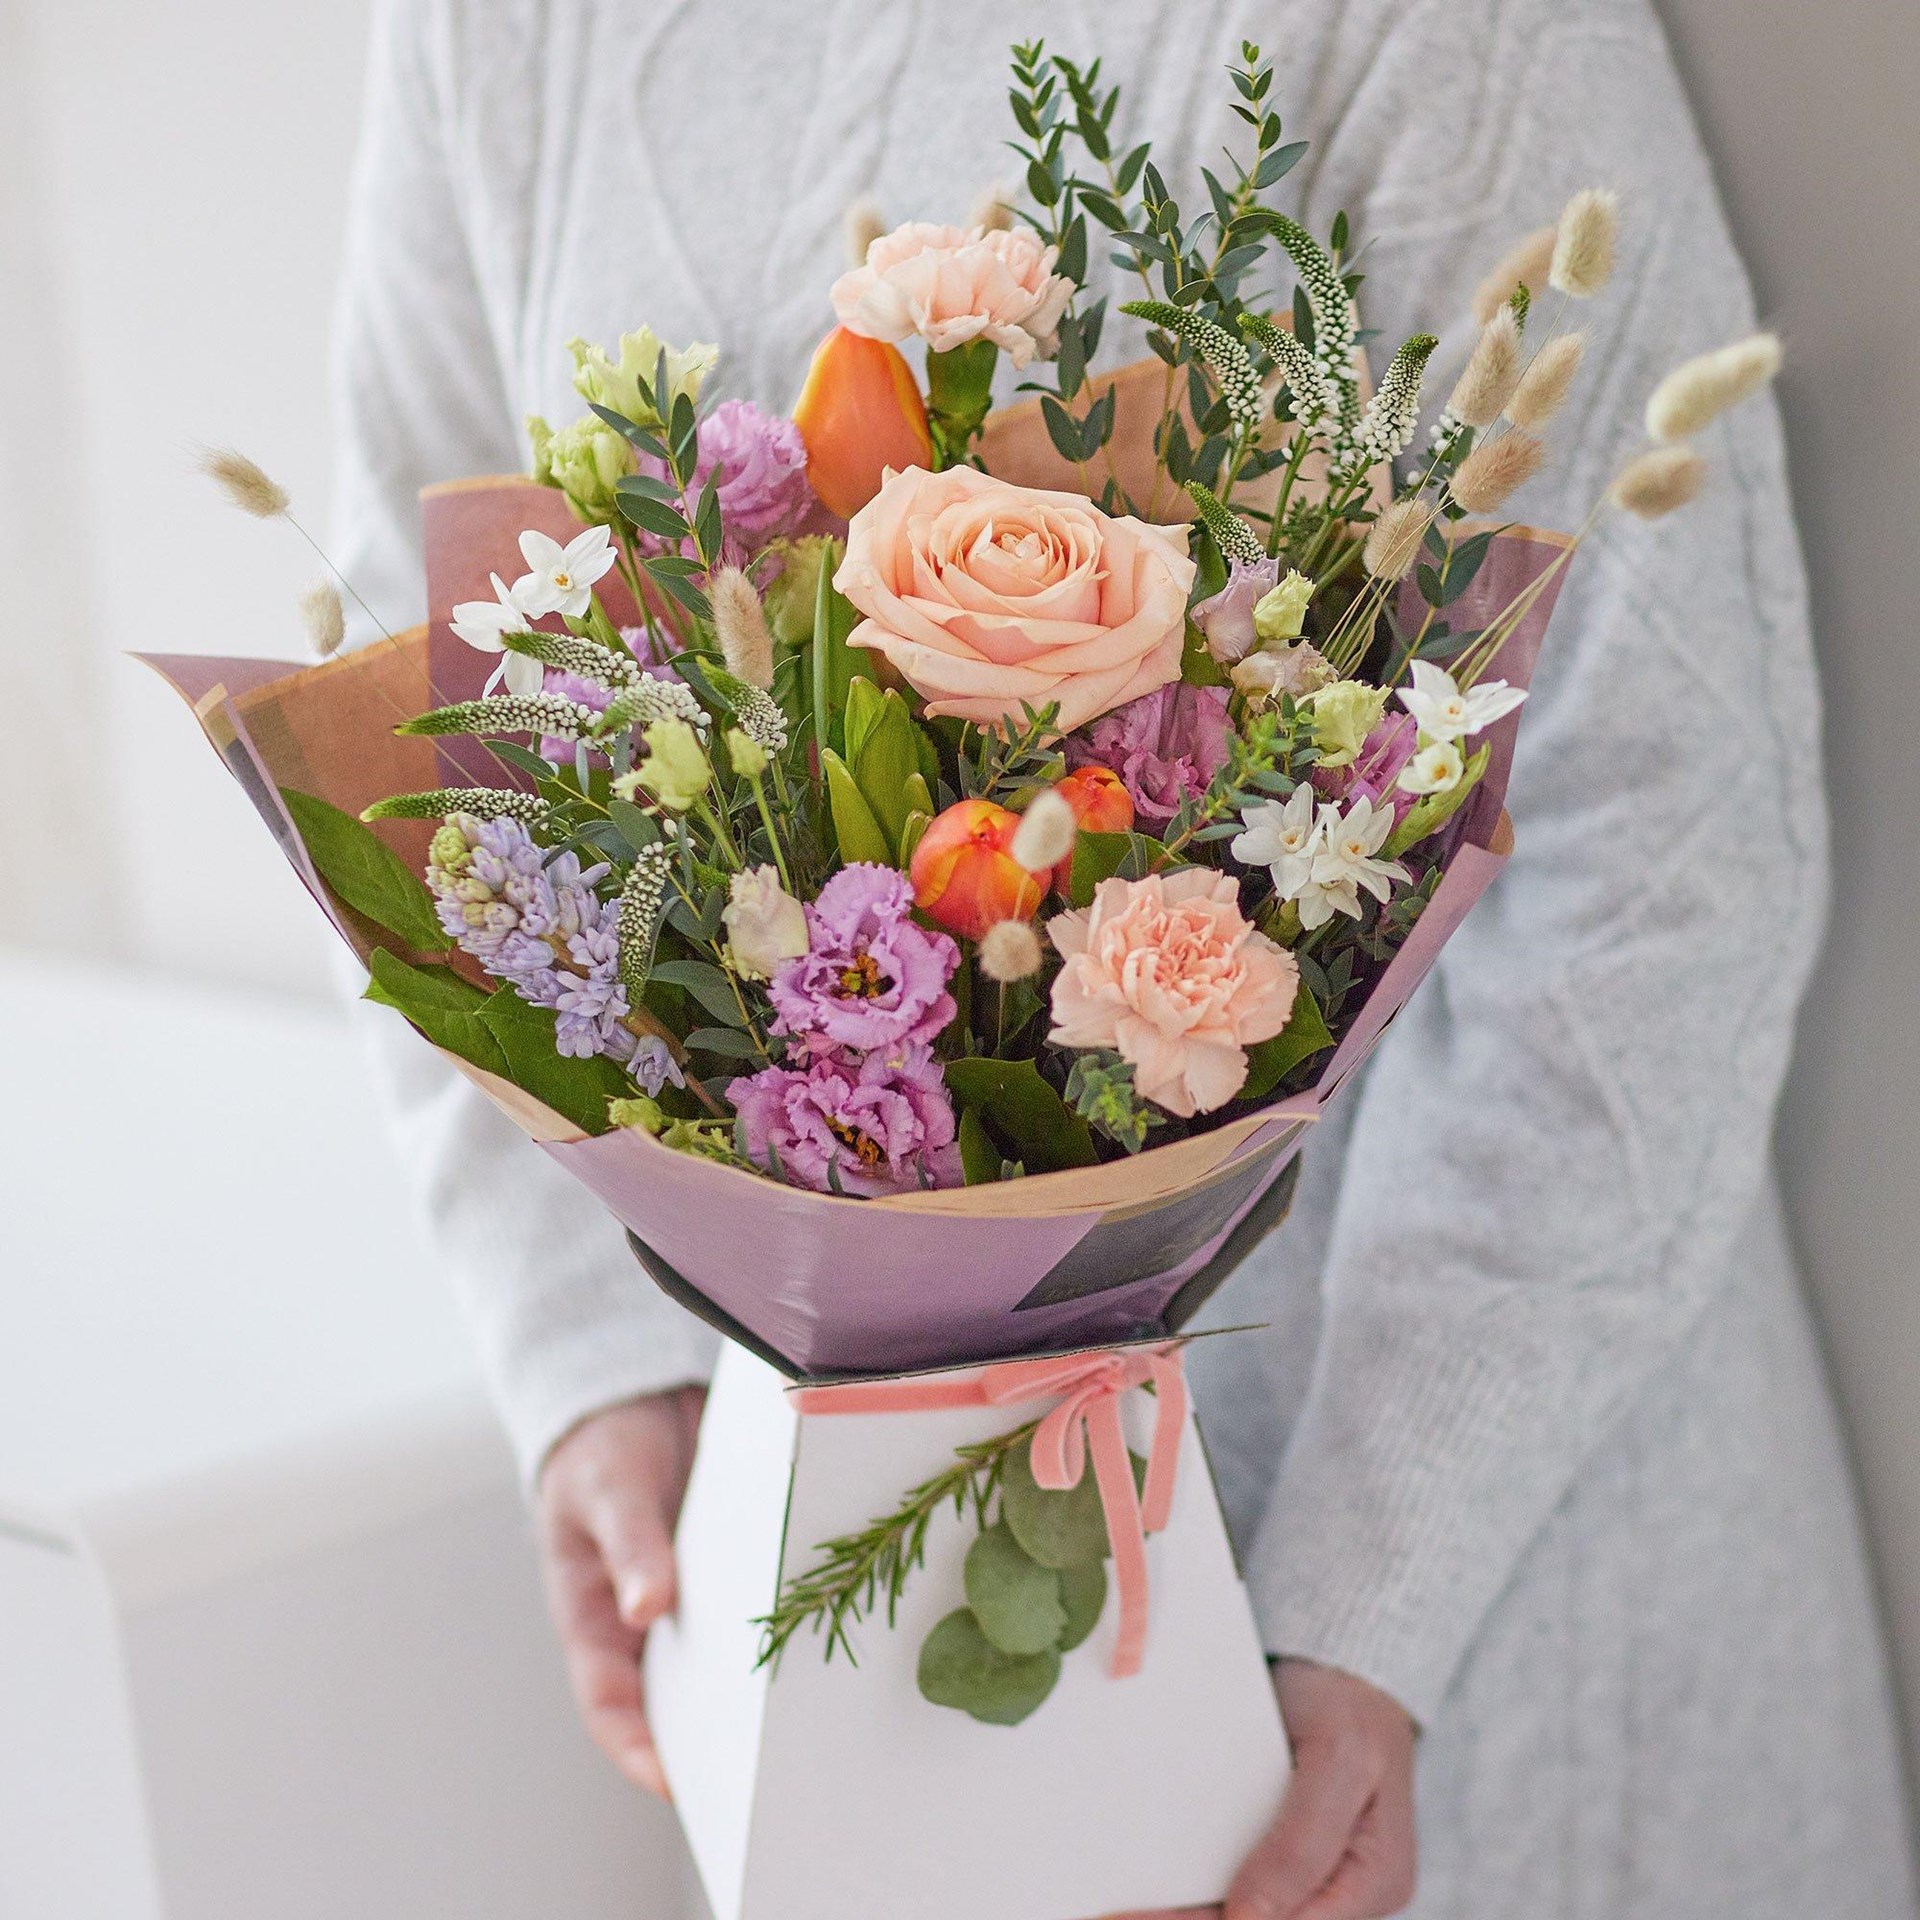 product image for Trending Spring Bouquet without Lilies.